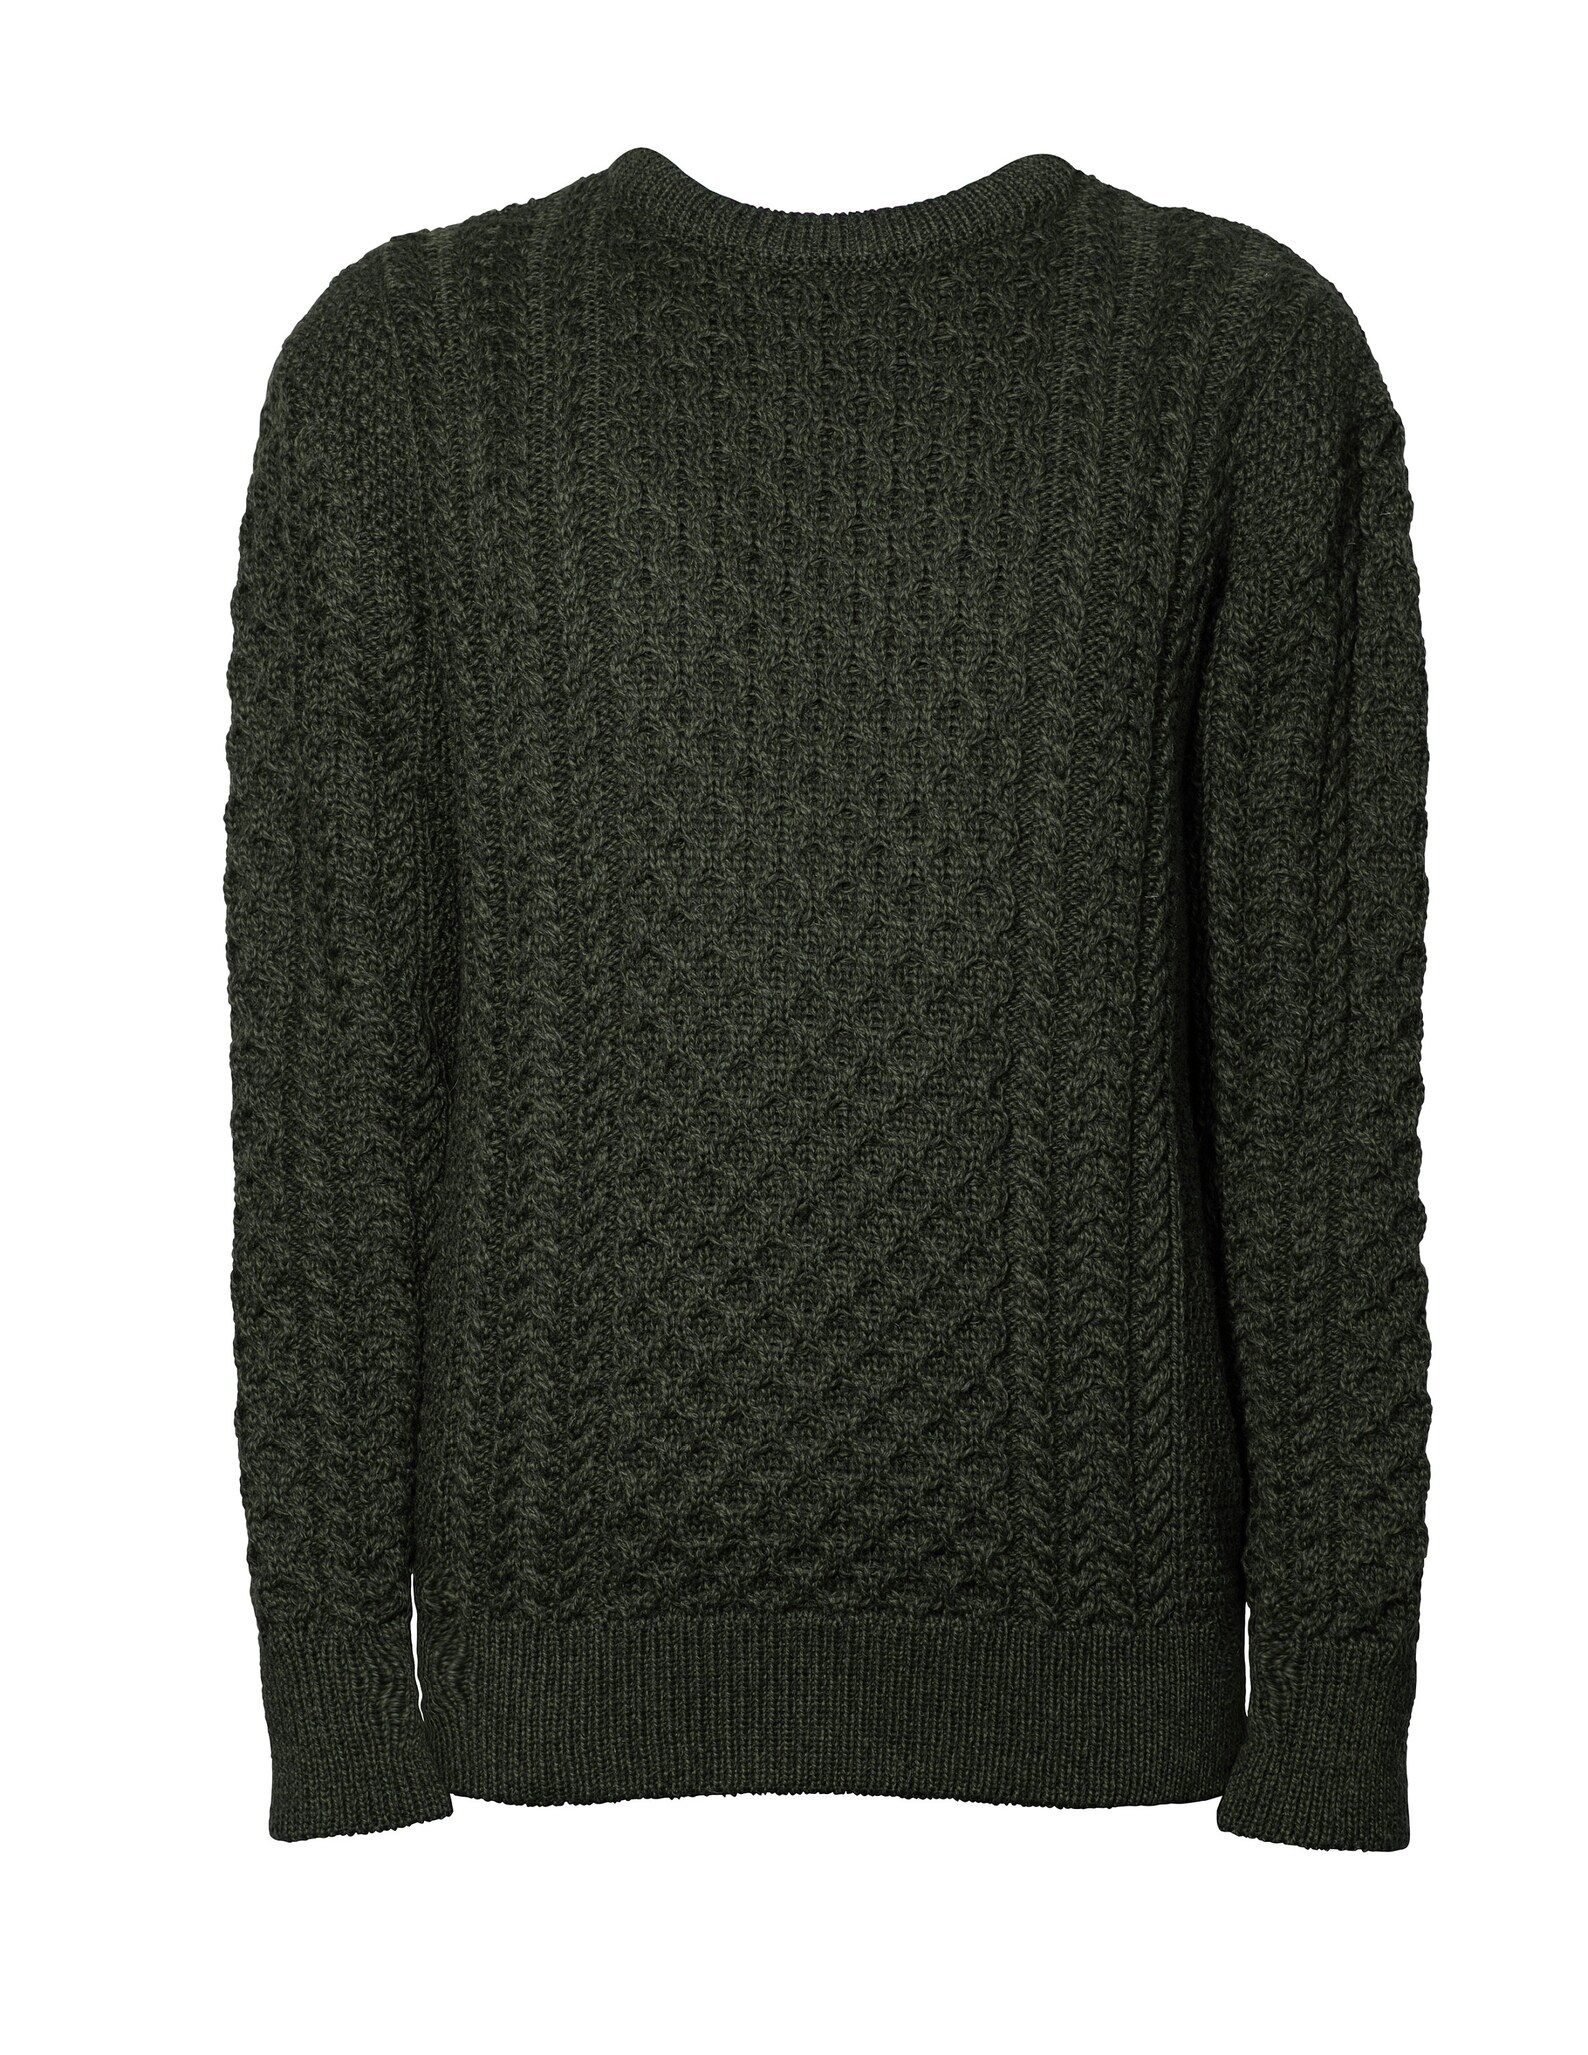 Men's Cable Knit Aran Fisherman's Sweater Army Green - Etsy